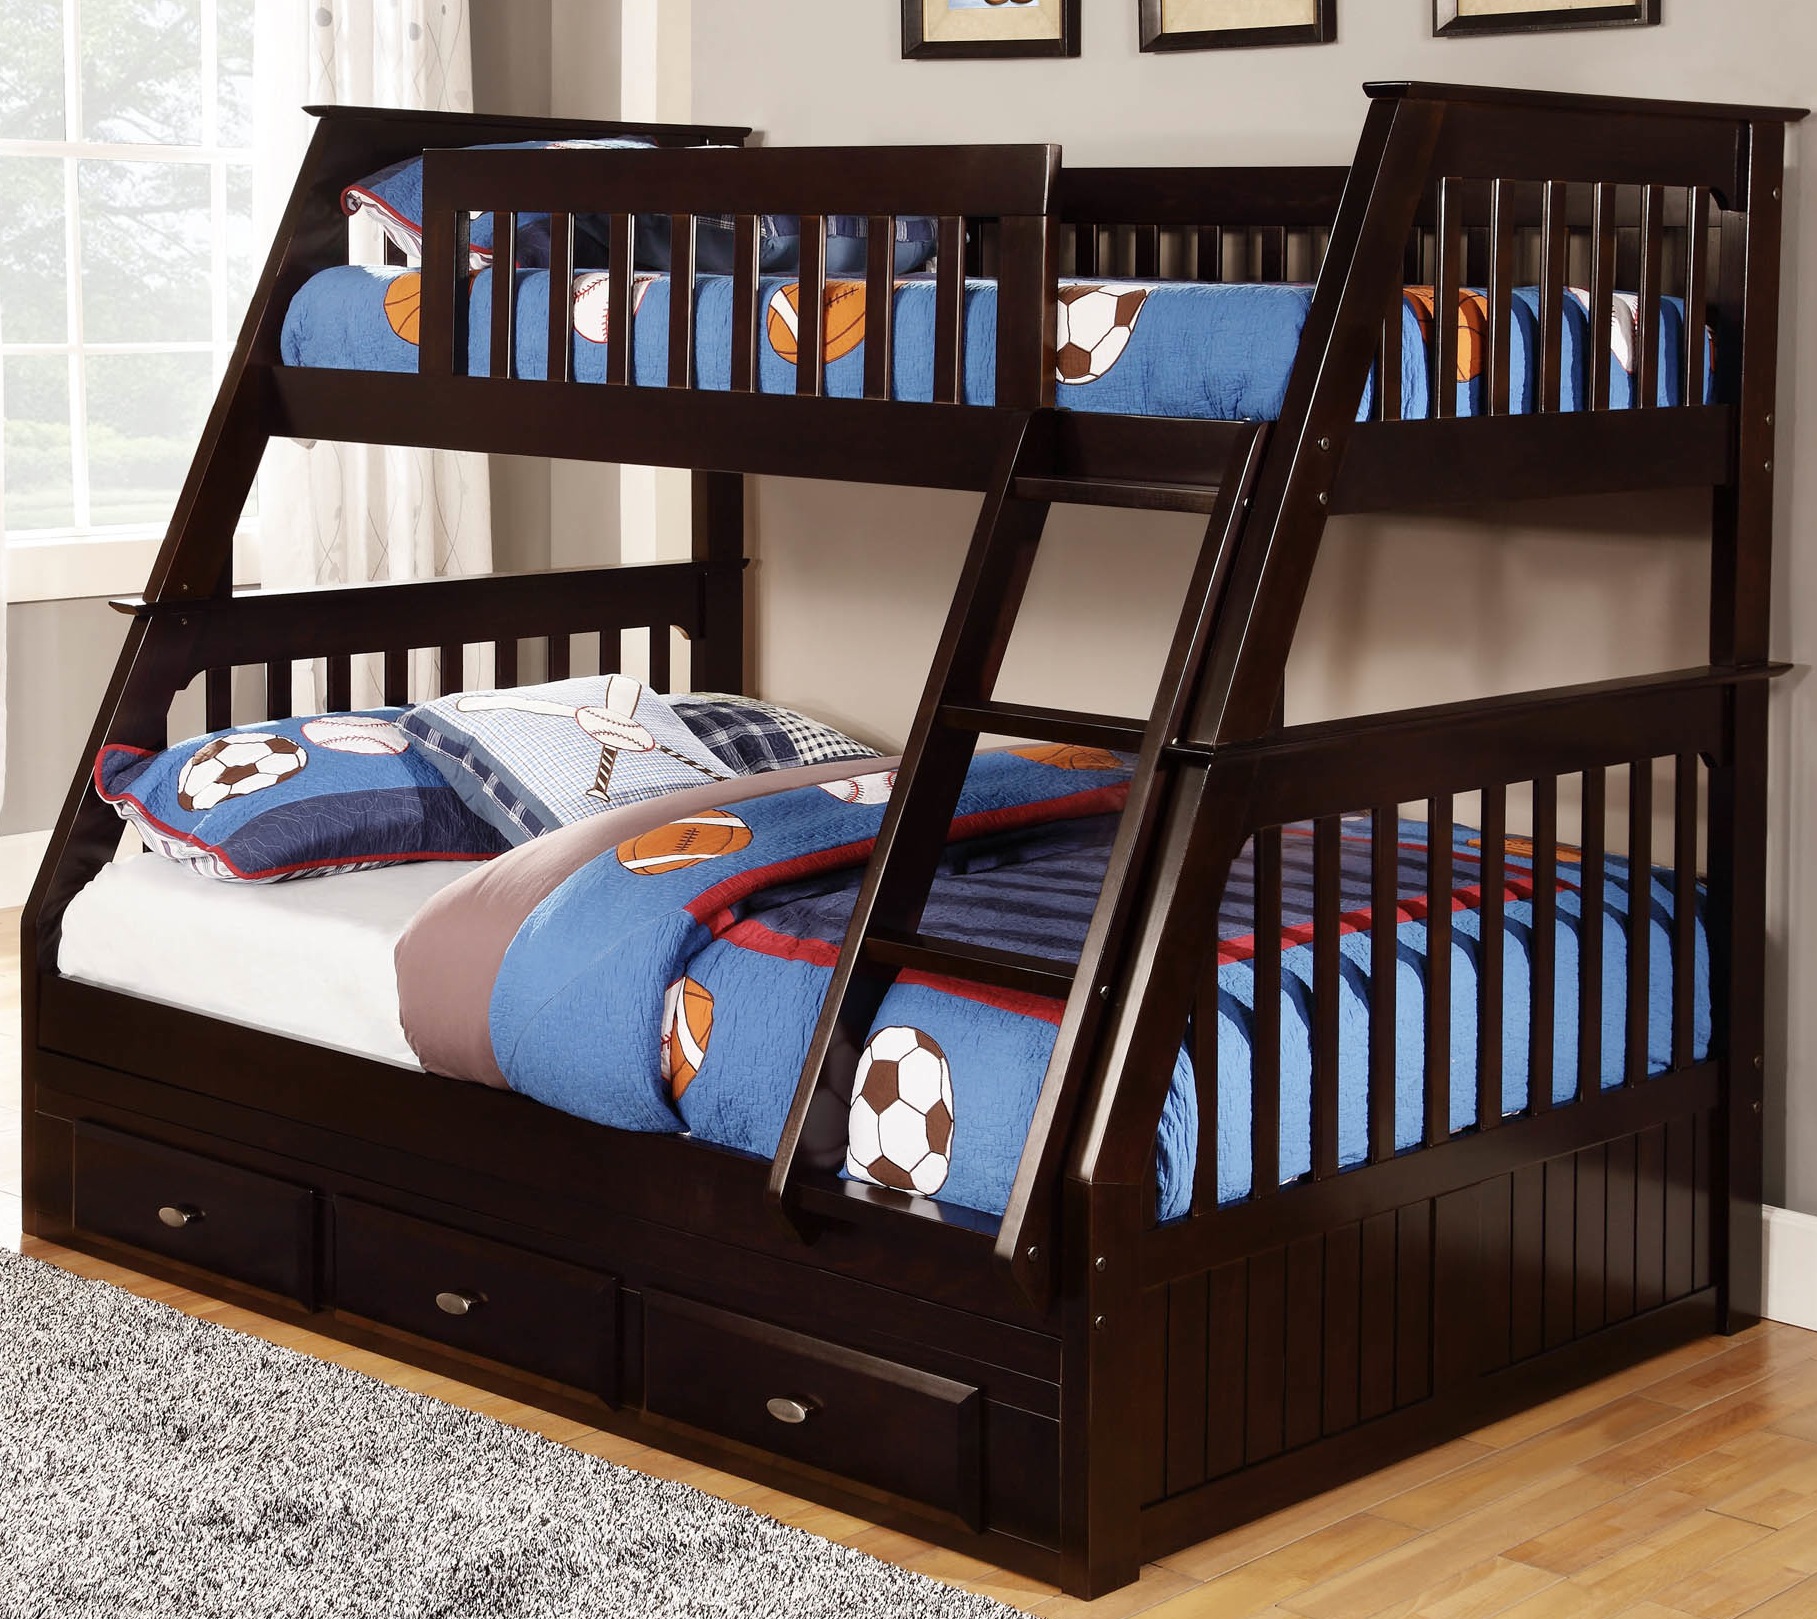 Espresso Mission Bunk Bed Kfs S, Are Bunk Beds Twin Or Full